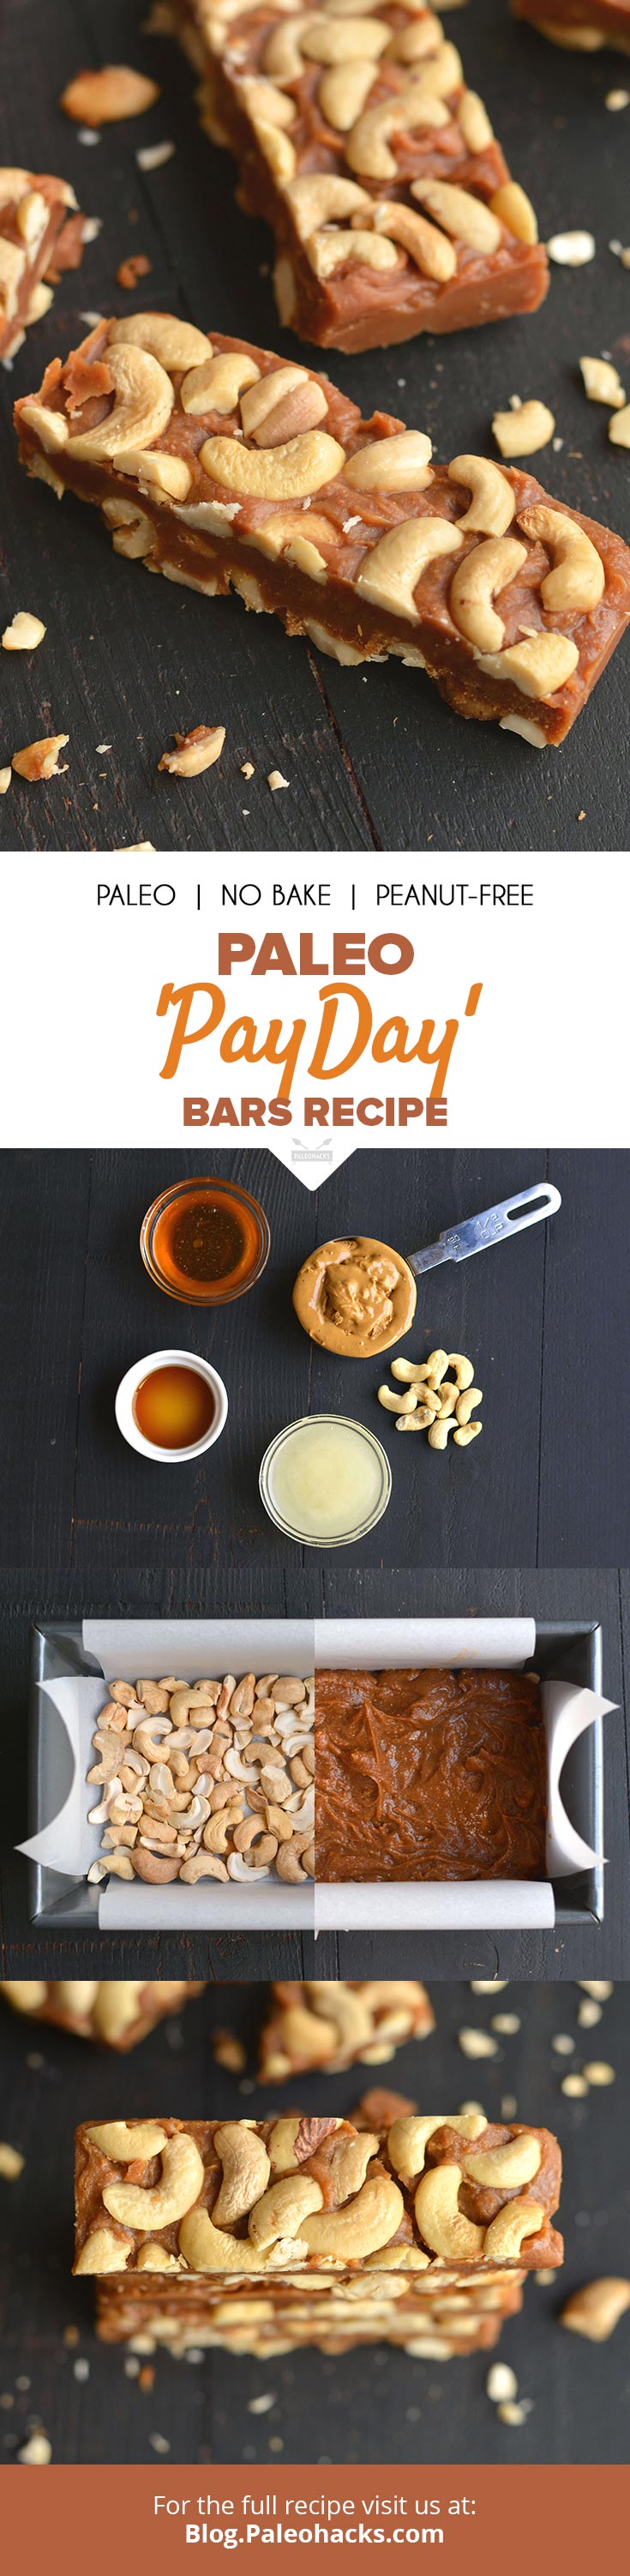 Nutty Paleo Payday Bars are made with cashews and creamy nut butter for a salty, chewy treat.